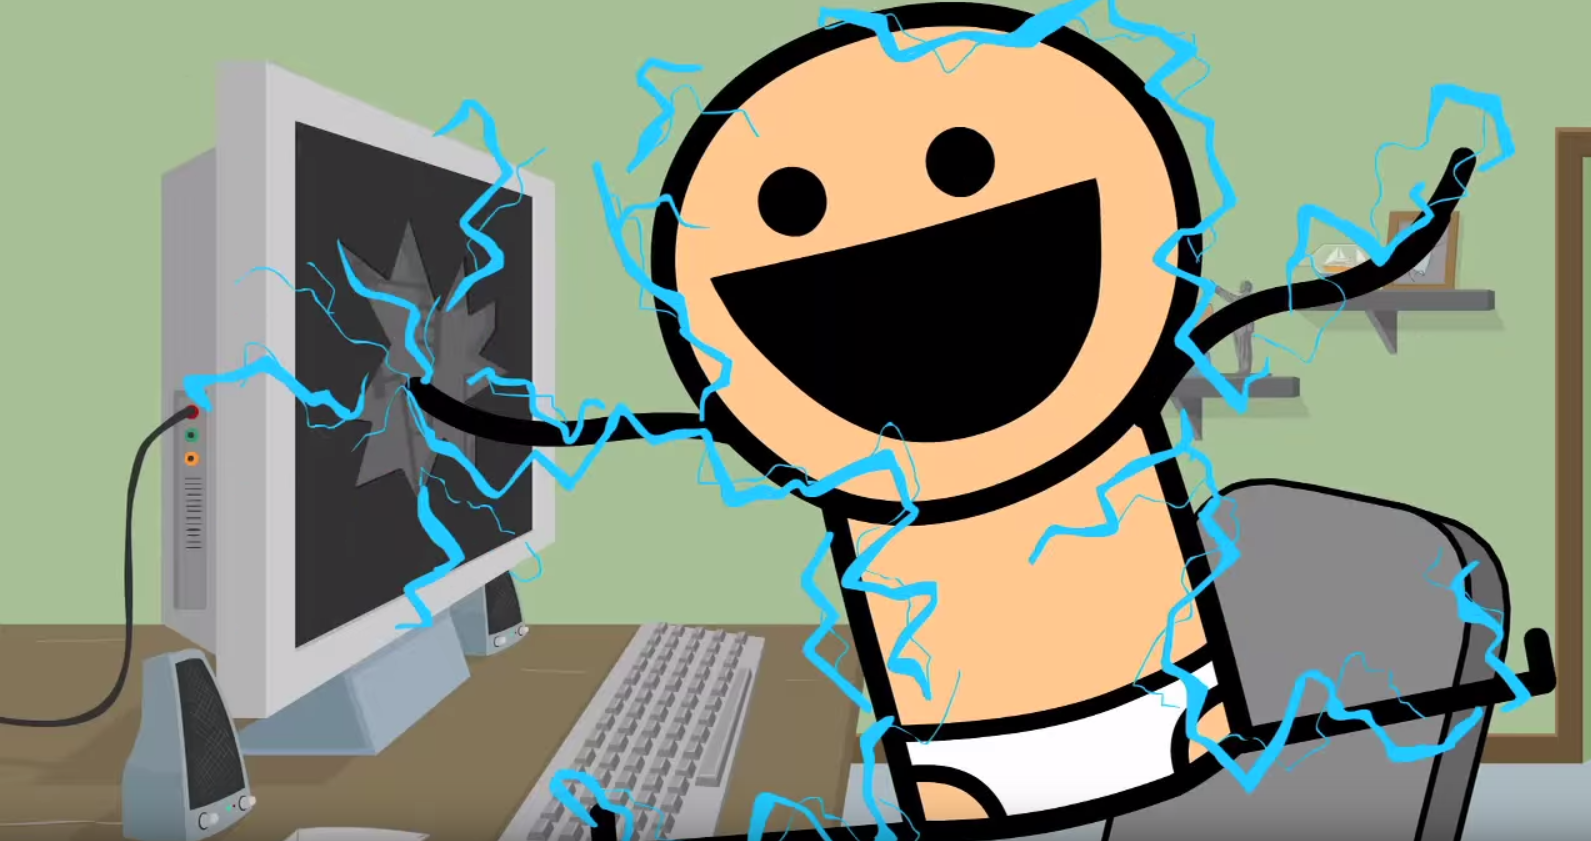 How to watch The Cyanide & Happiness show!